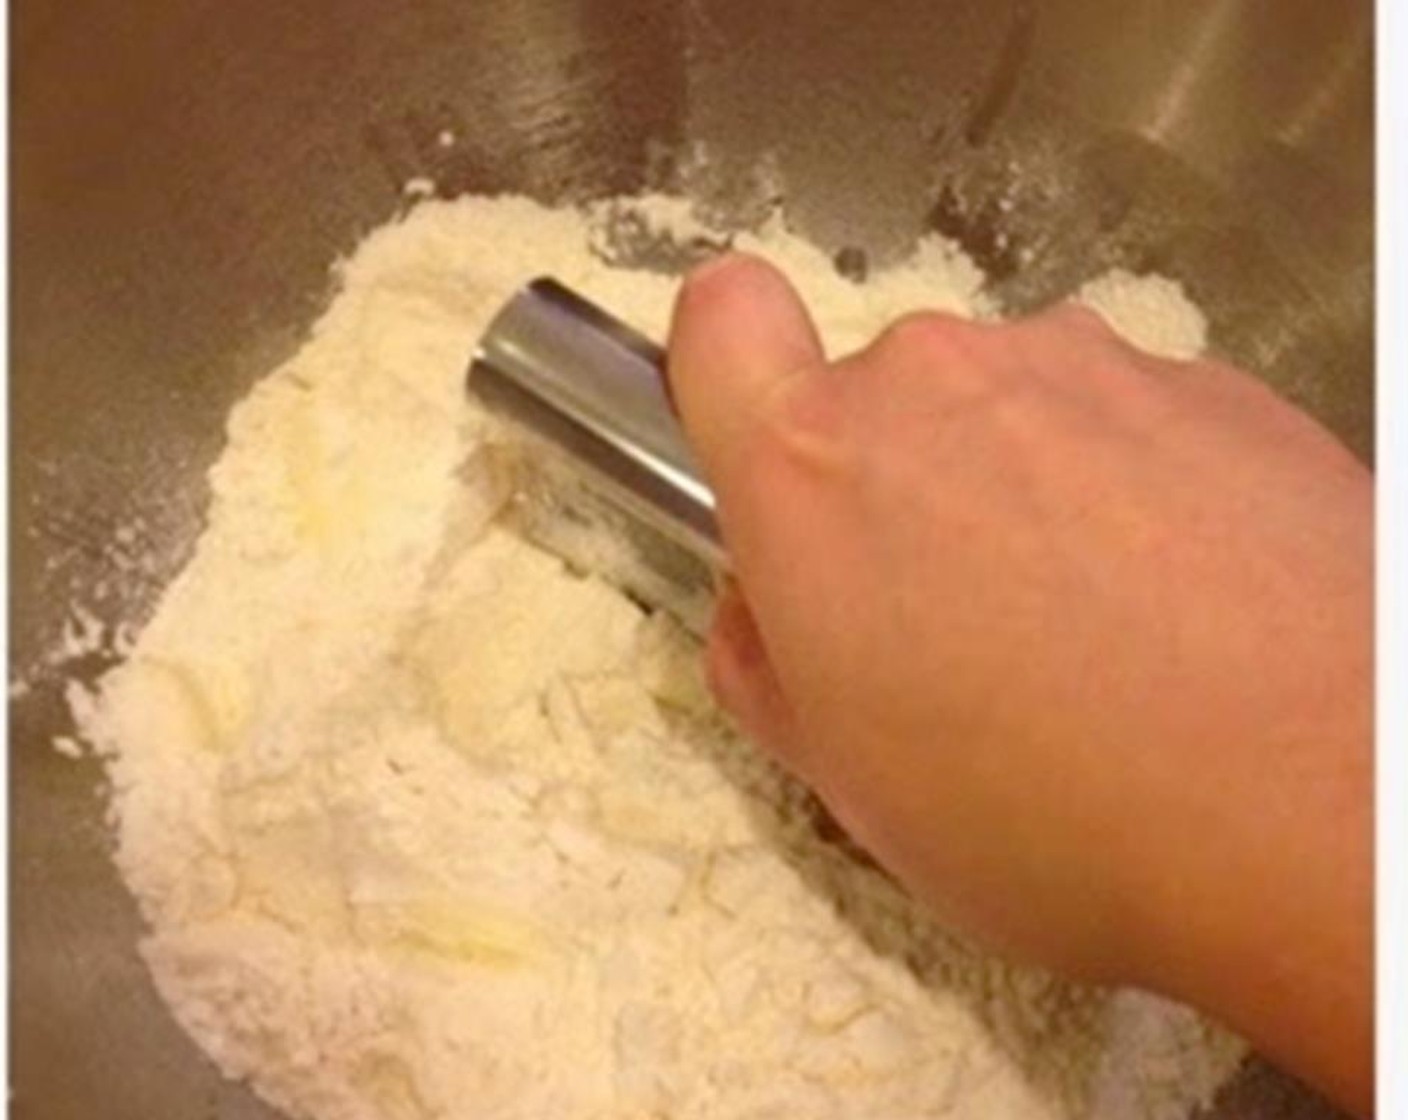 step 1 Sift the Self-Rising Flour (2 cups) and combine with the Salt (1 pinch) and Granulated Sugar (1 Tbsp). Cut the Butter (1/3 cup) into cubes and use a cutter to chop the butter into the flour until it becomes a fine crumble.